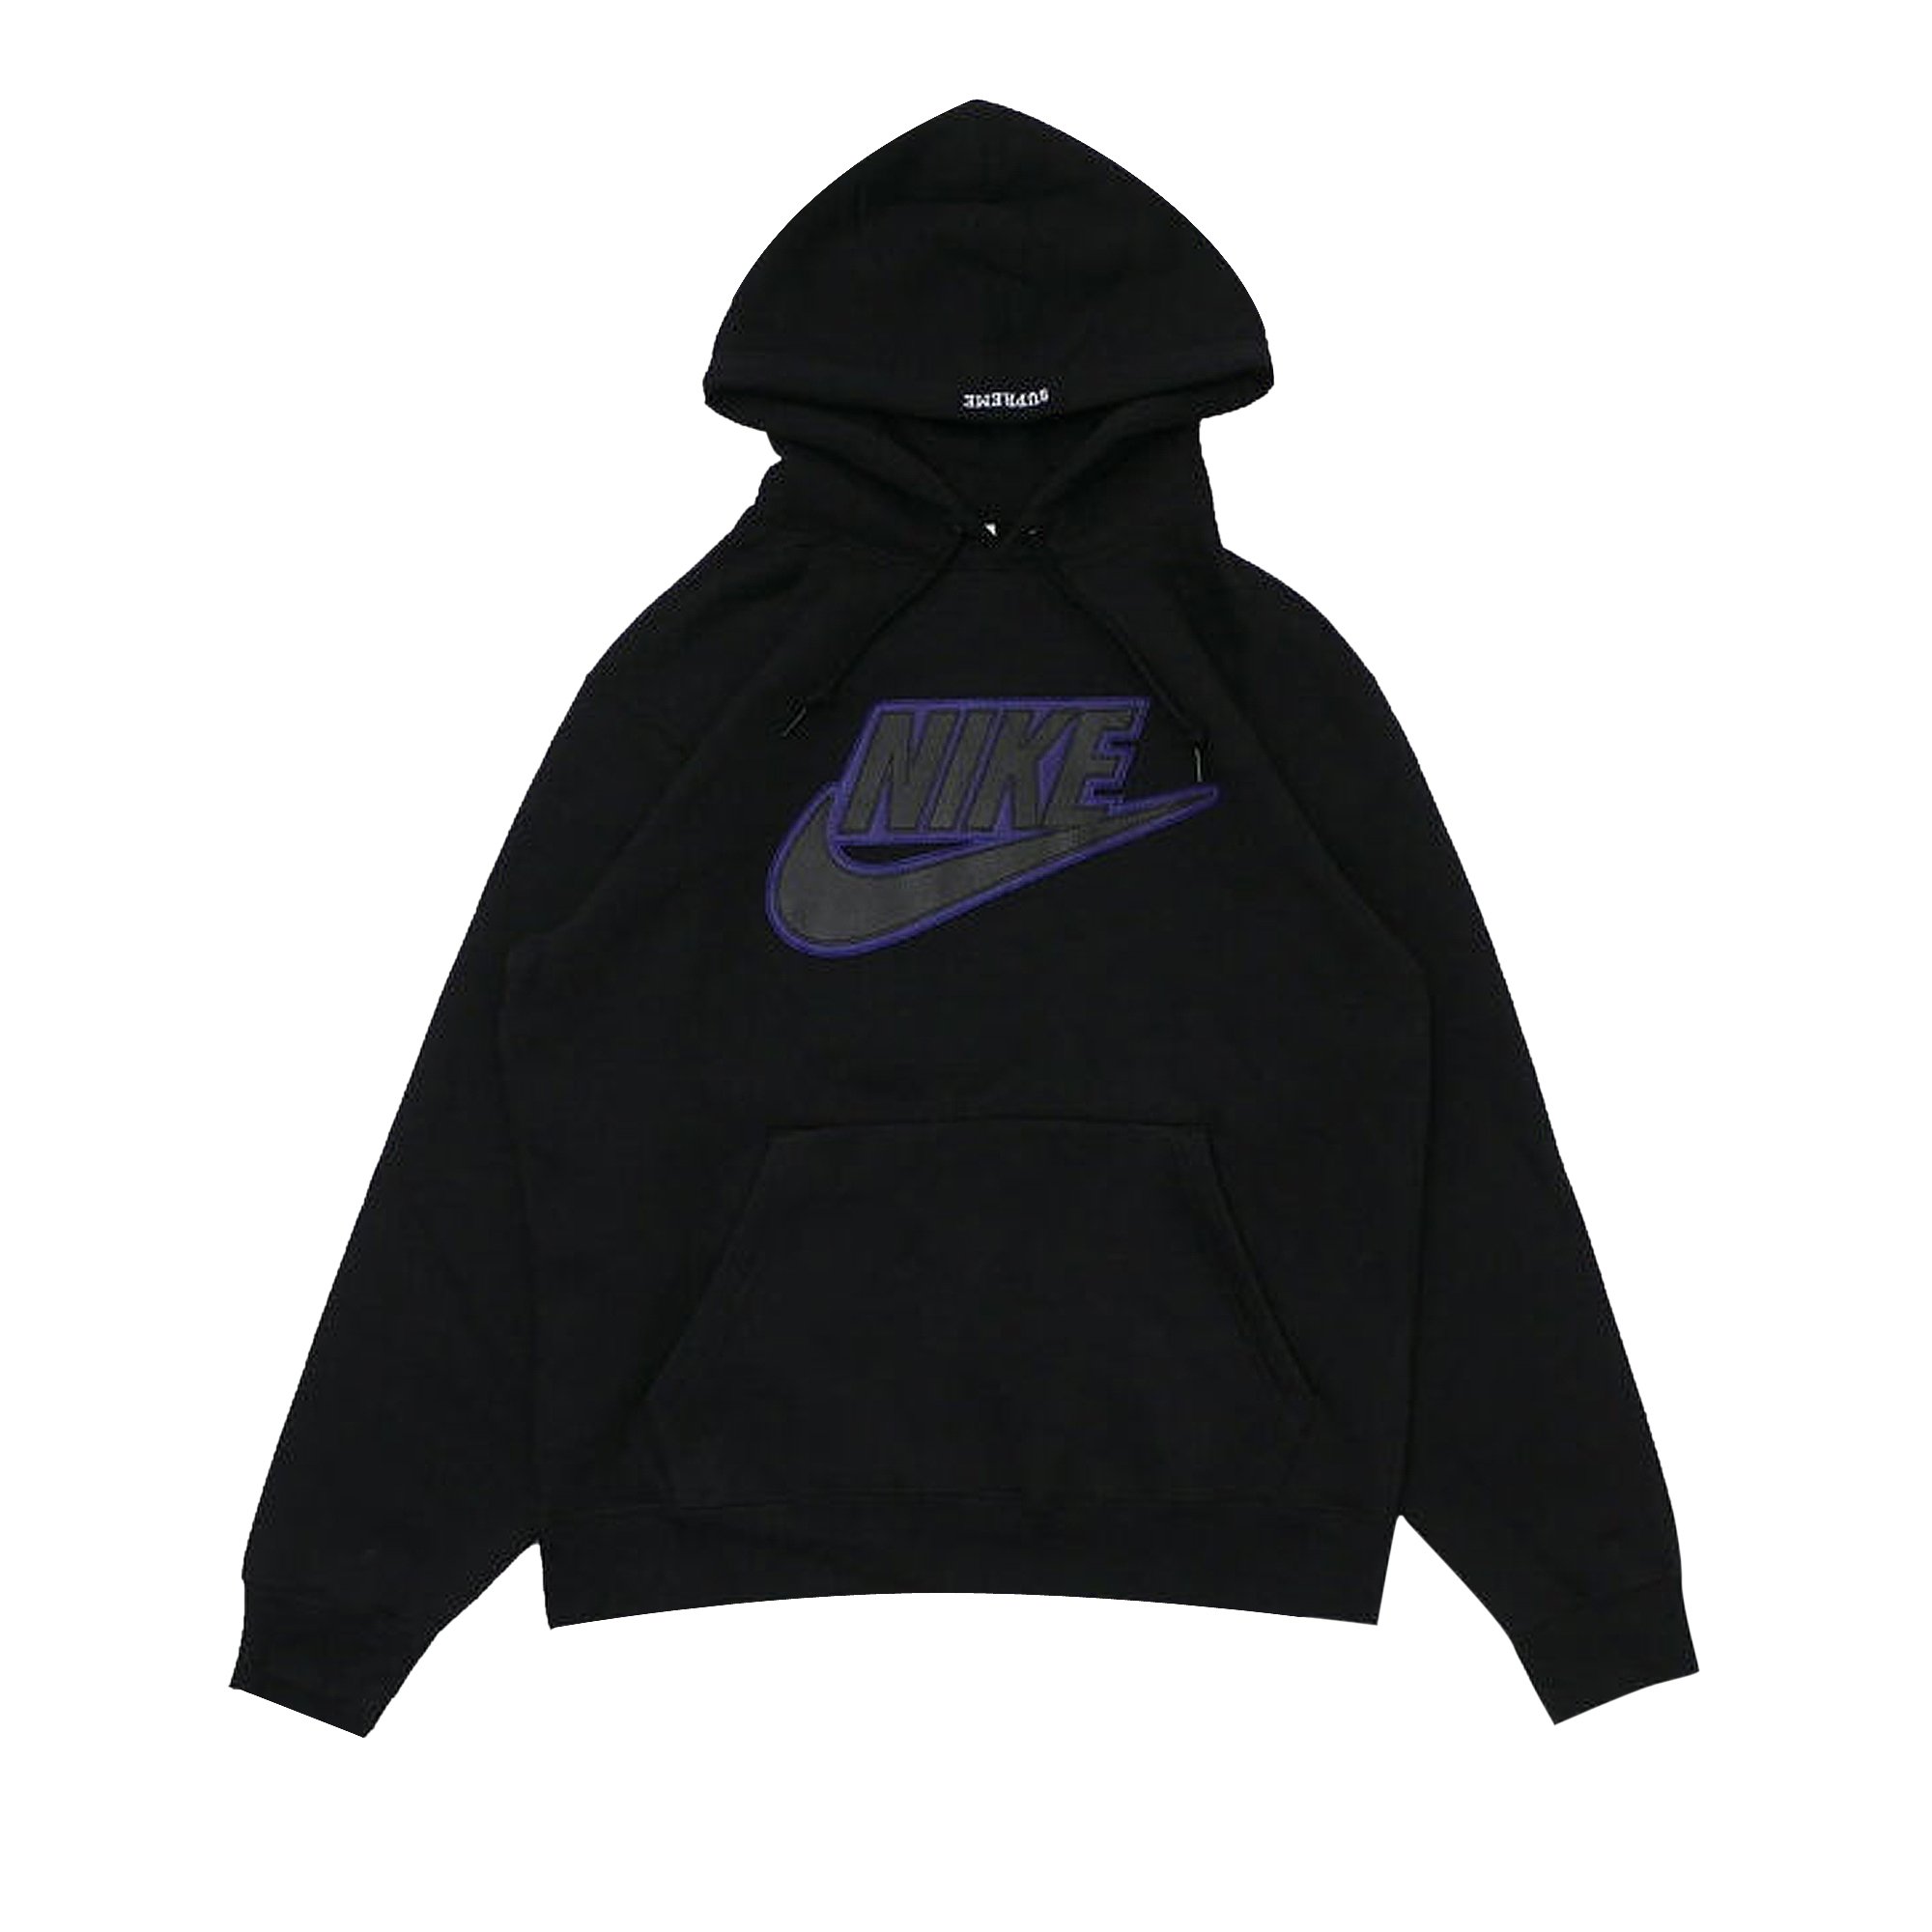 supSupremeNIKE 19AW Leather Applique Hooded - パーカー